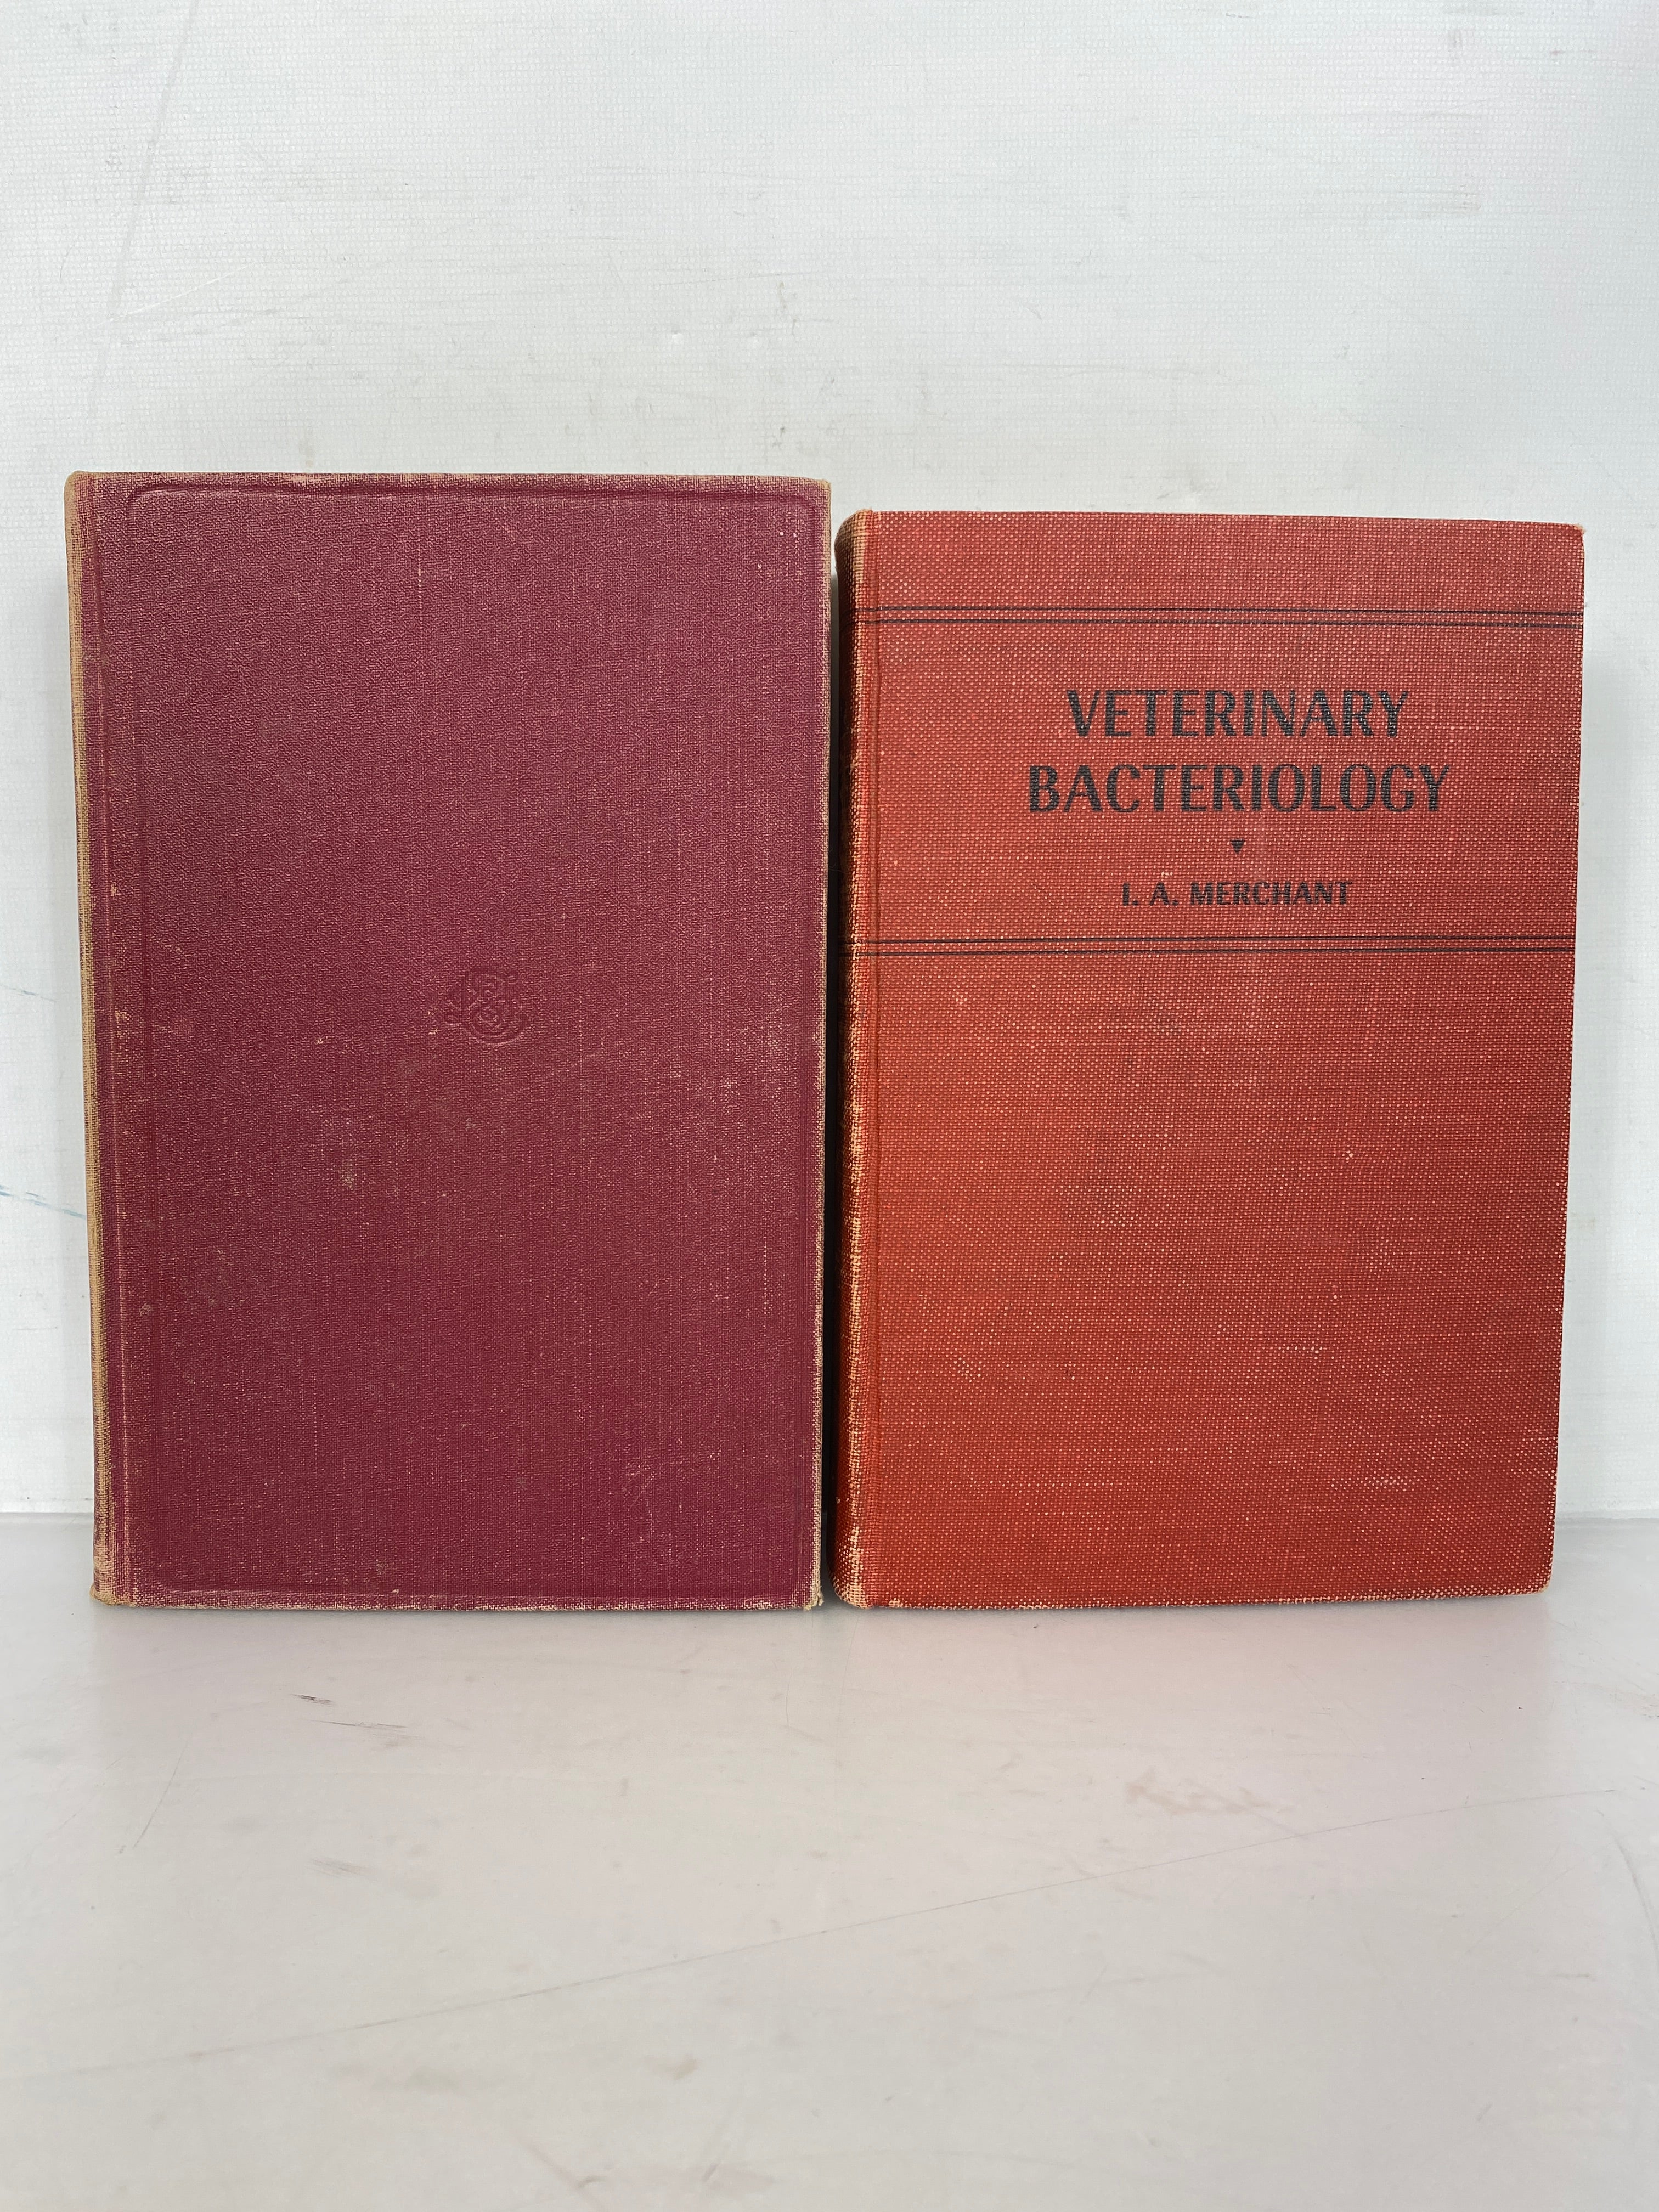 Lot of 2: Diseases of the Small Domestic Animals/Veterinary Bacteriology HC